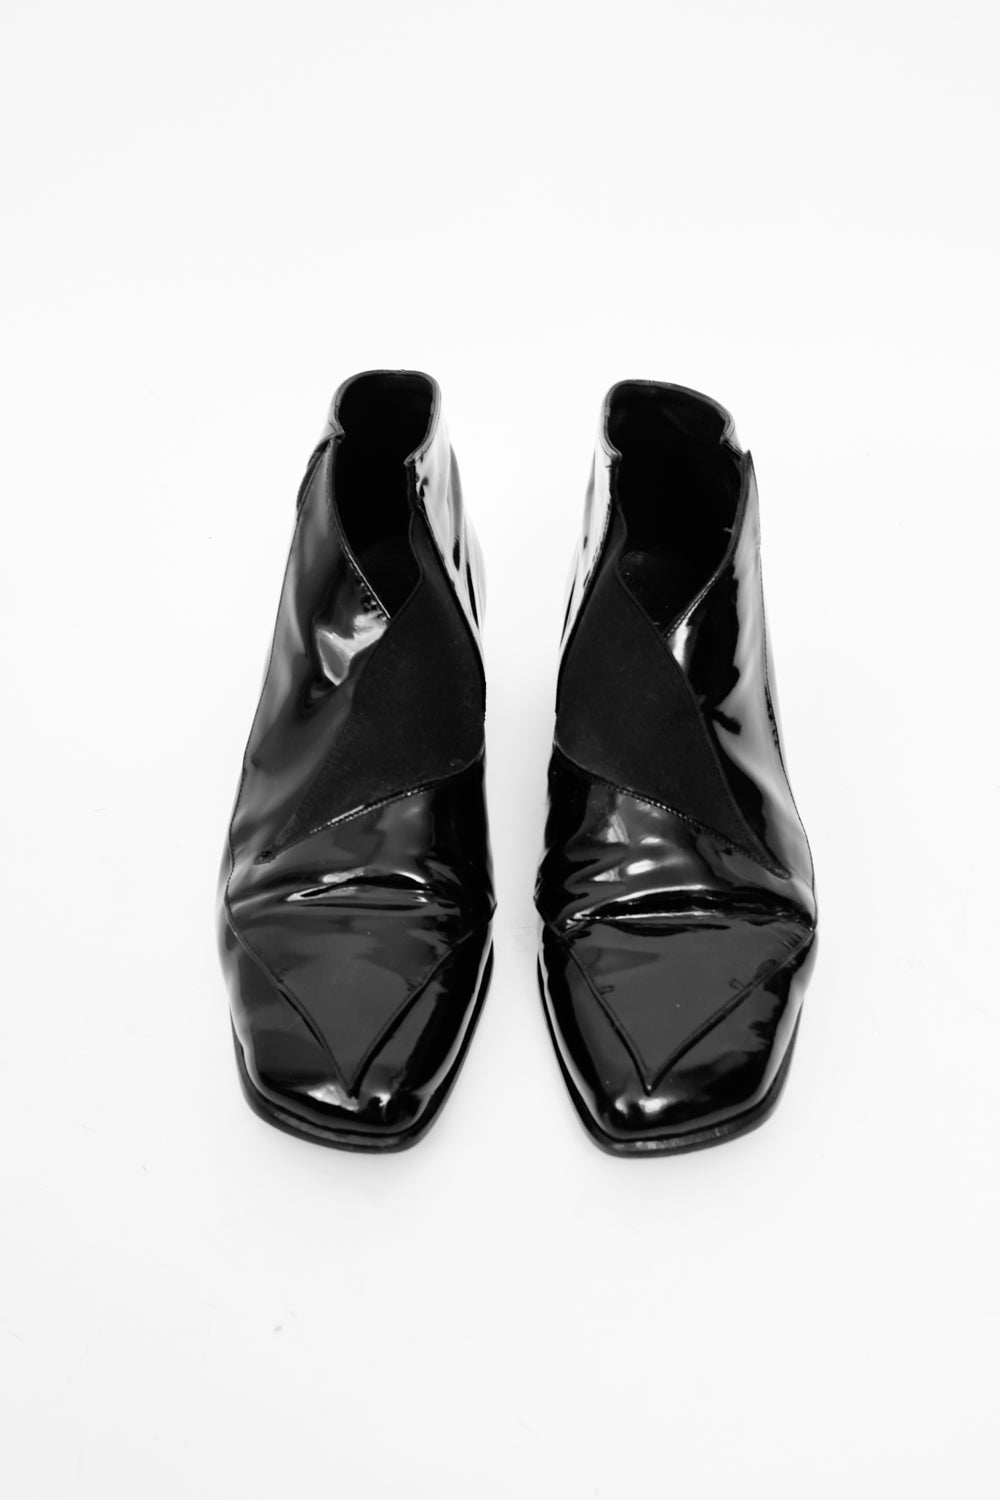 SPECIAL VINTAGE ITALY BLACK 39 PATENT LEATHER BOOTS